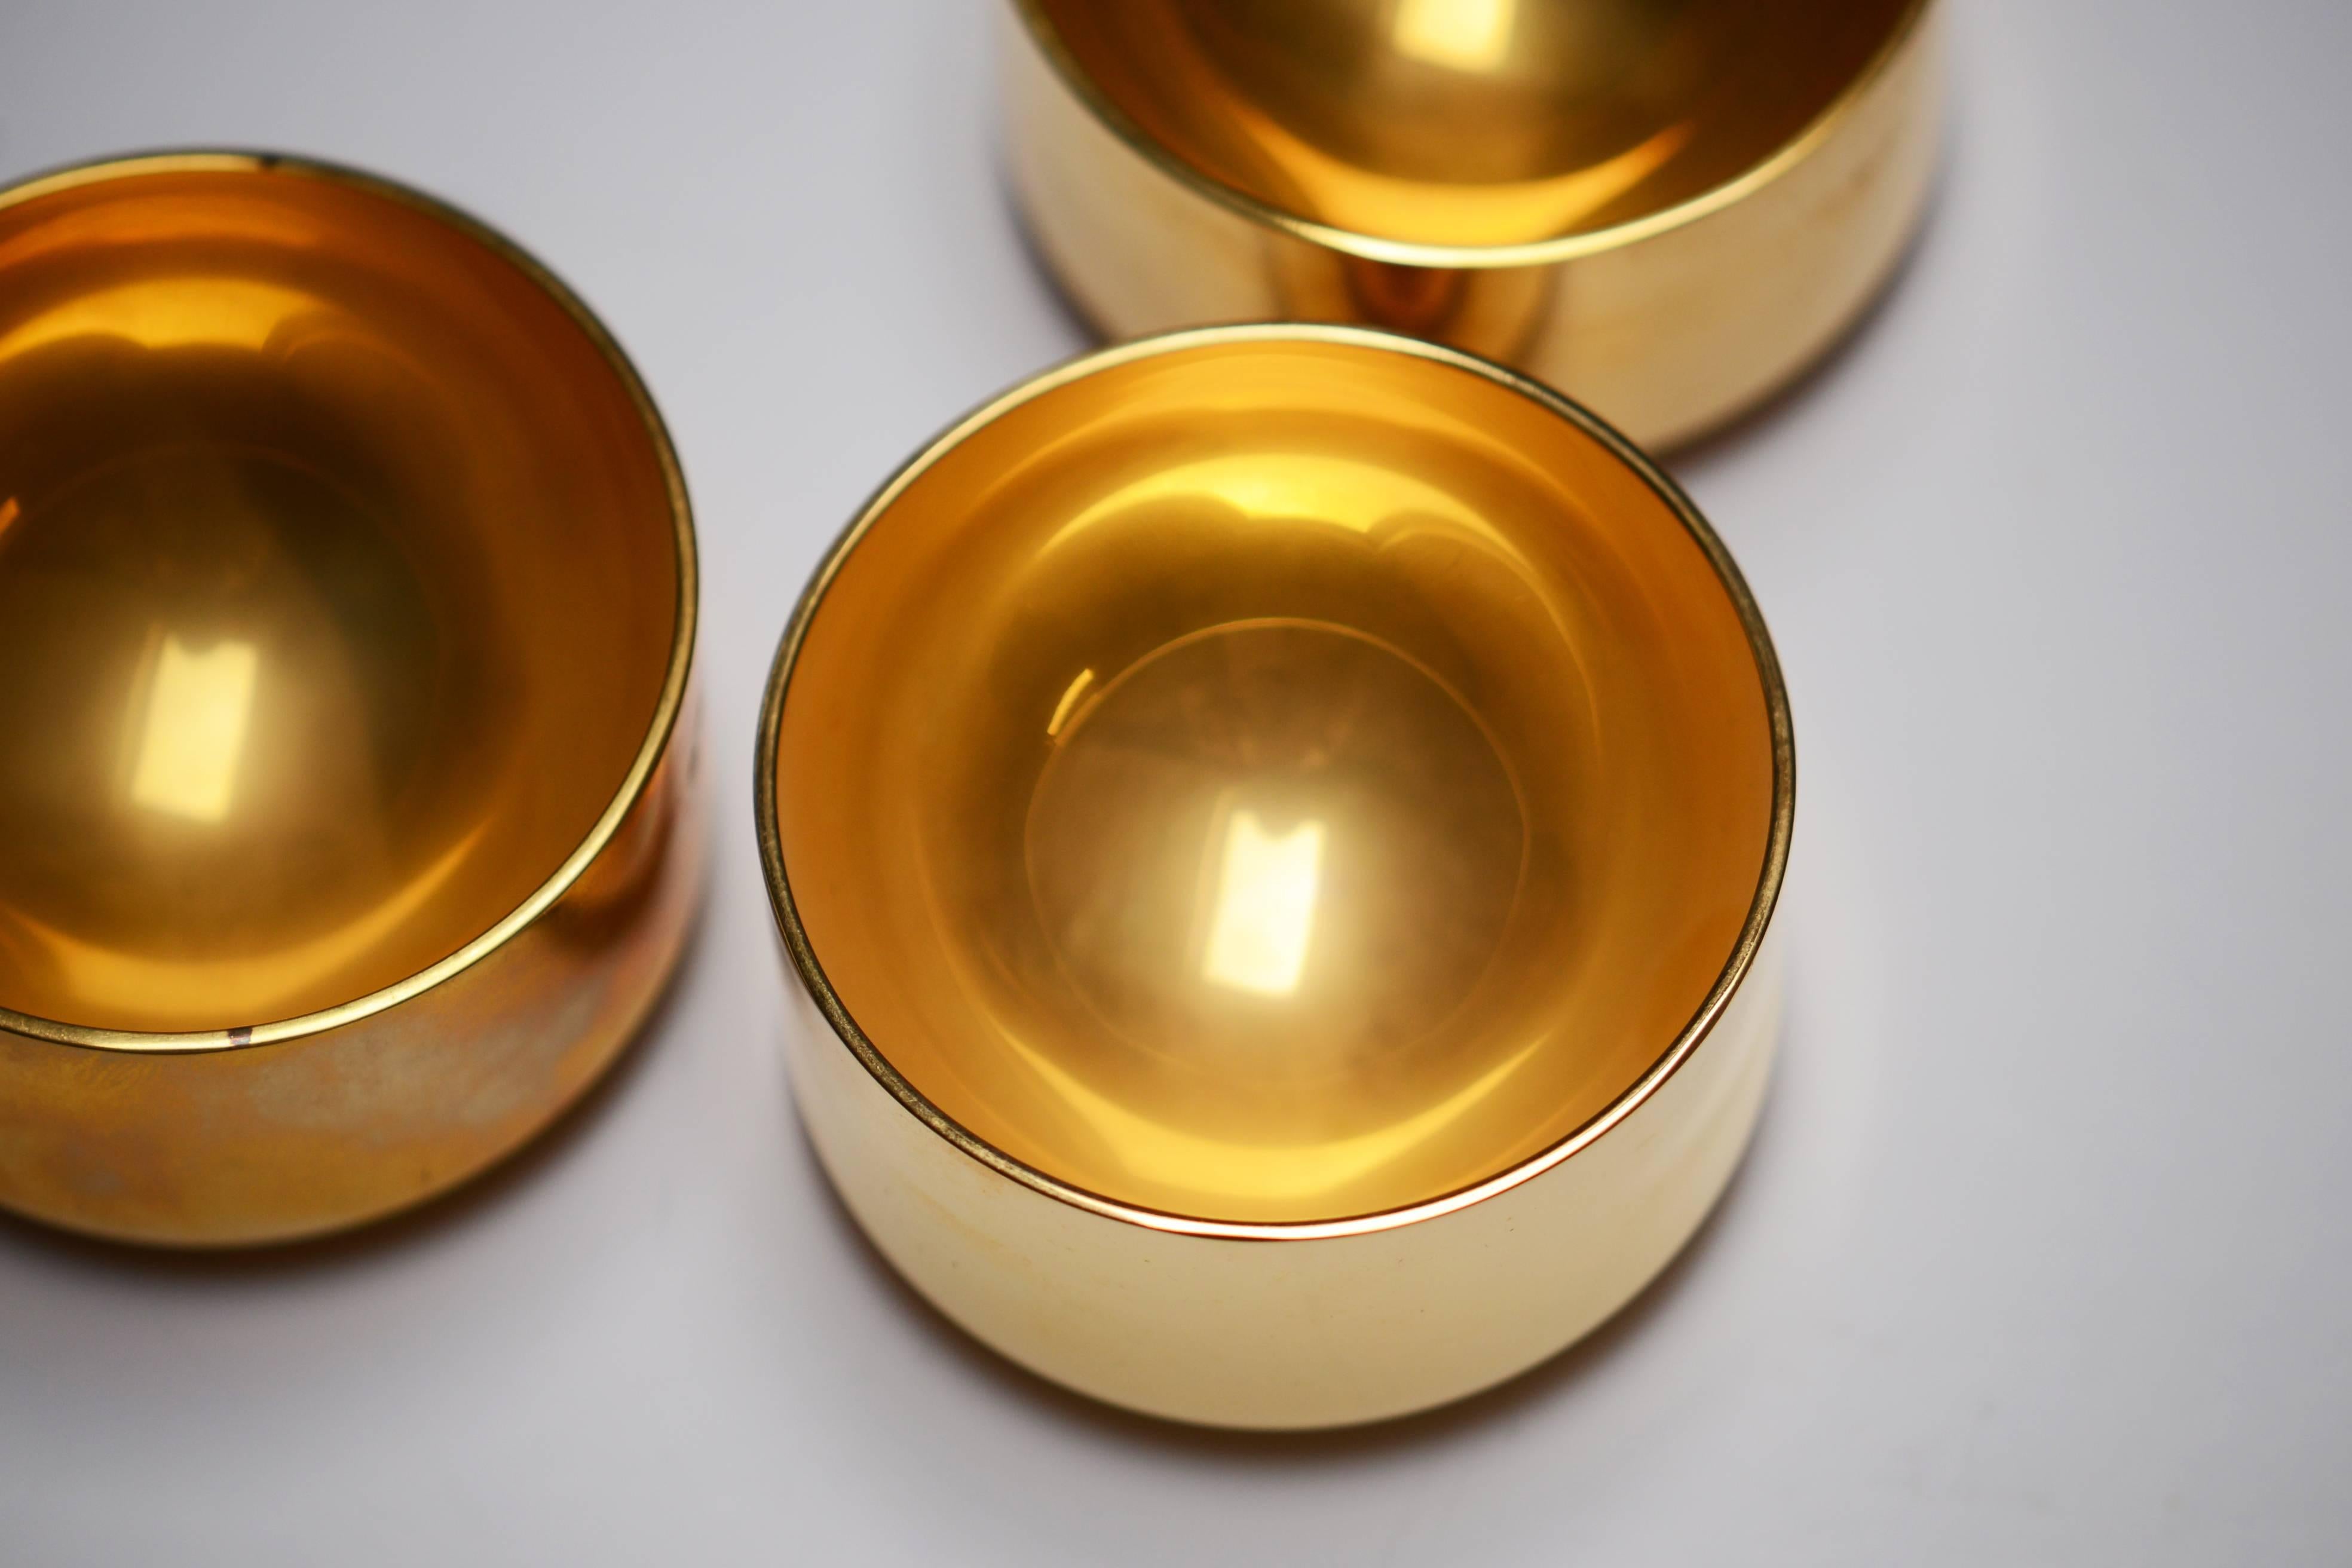 Pierre Forssell 12 Gold-Plated Alcohol Tasters, Made by Skultuna, Sweden In Good Condition For Sale In Brussels, BE